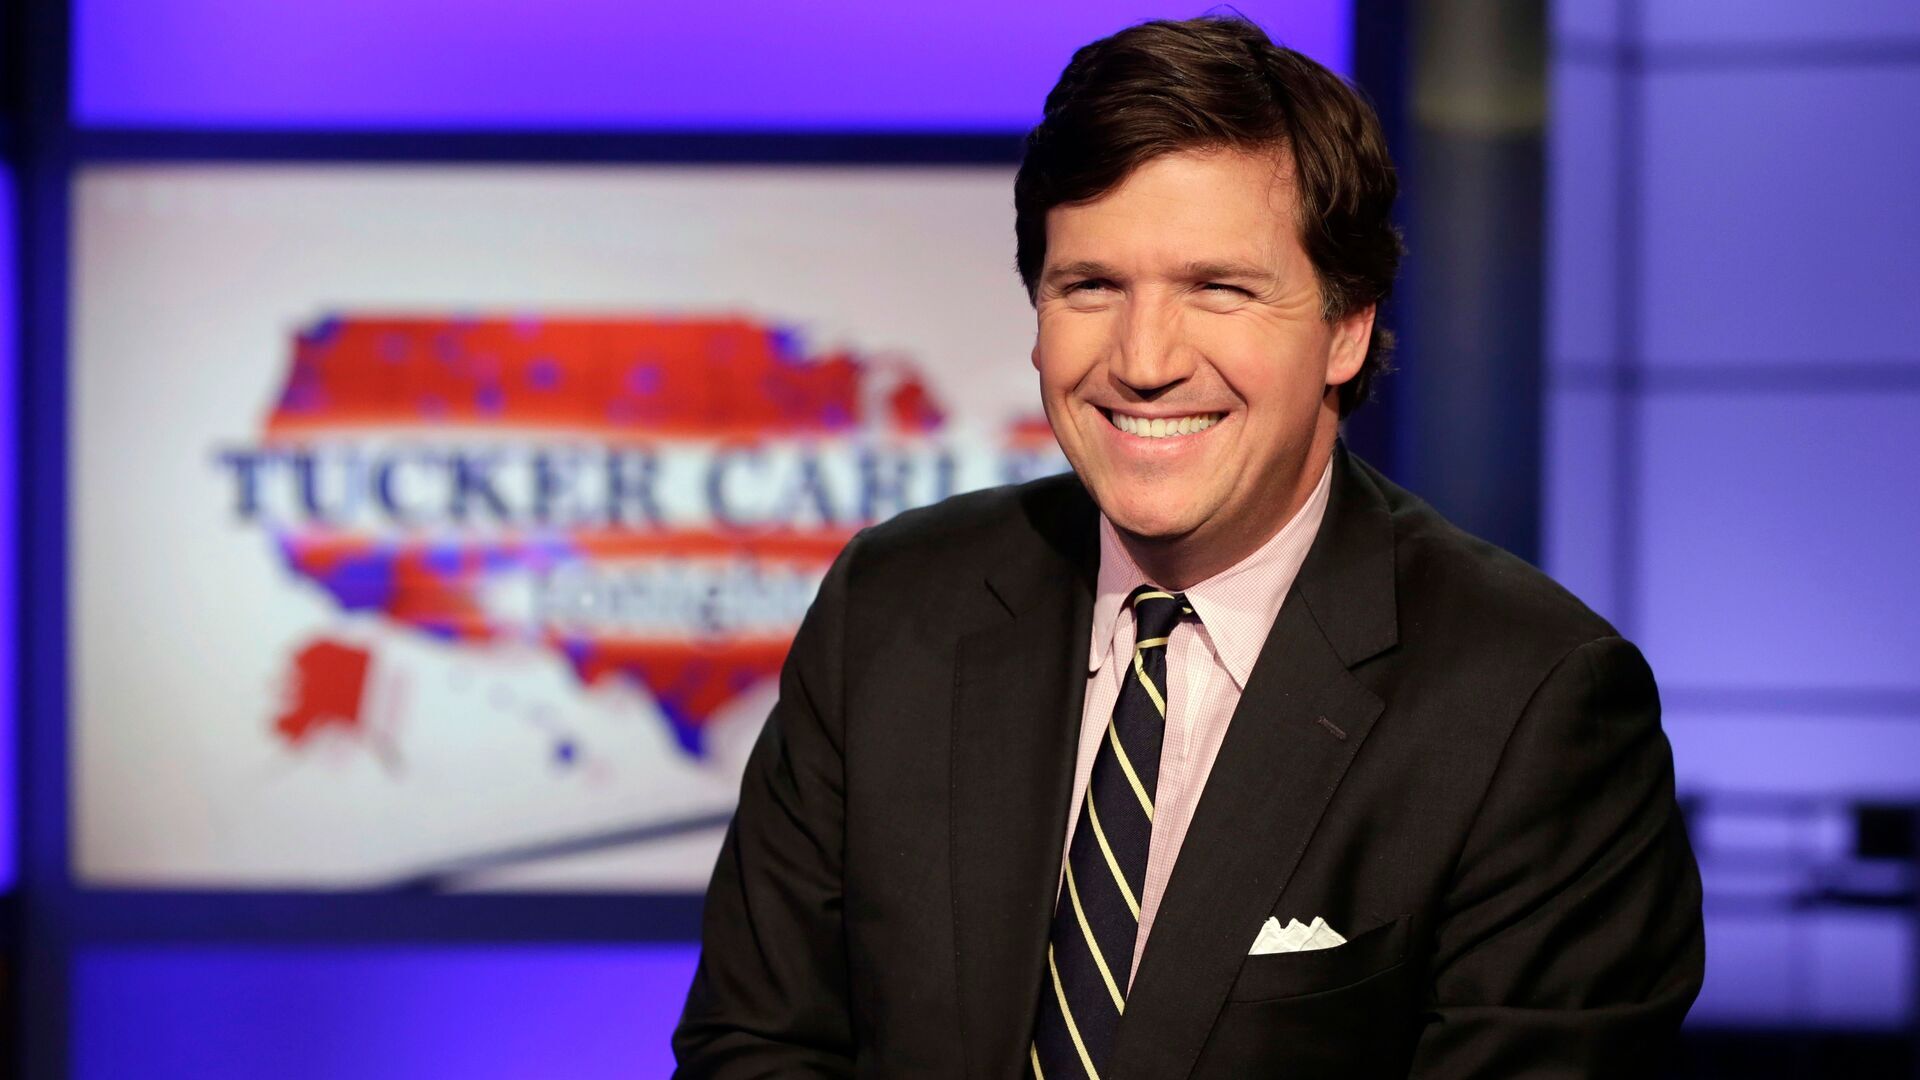 Tucker Carlson: The Controversial Fox News Host’s Life, Career, and Impact